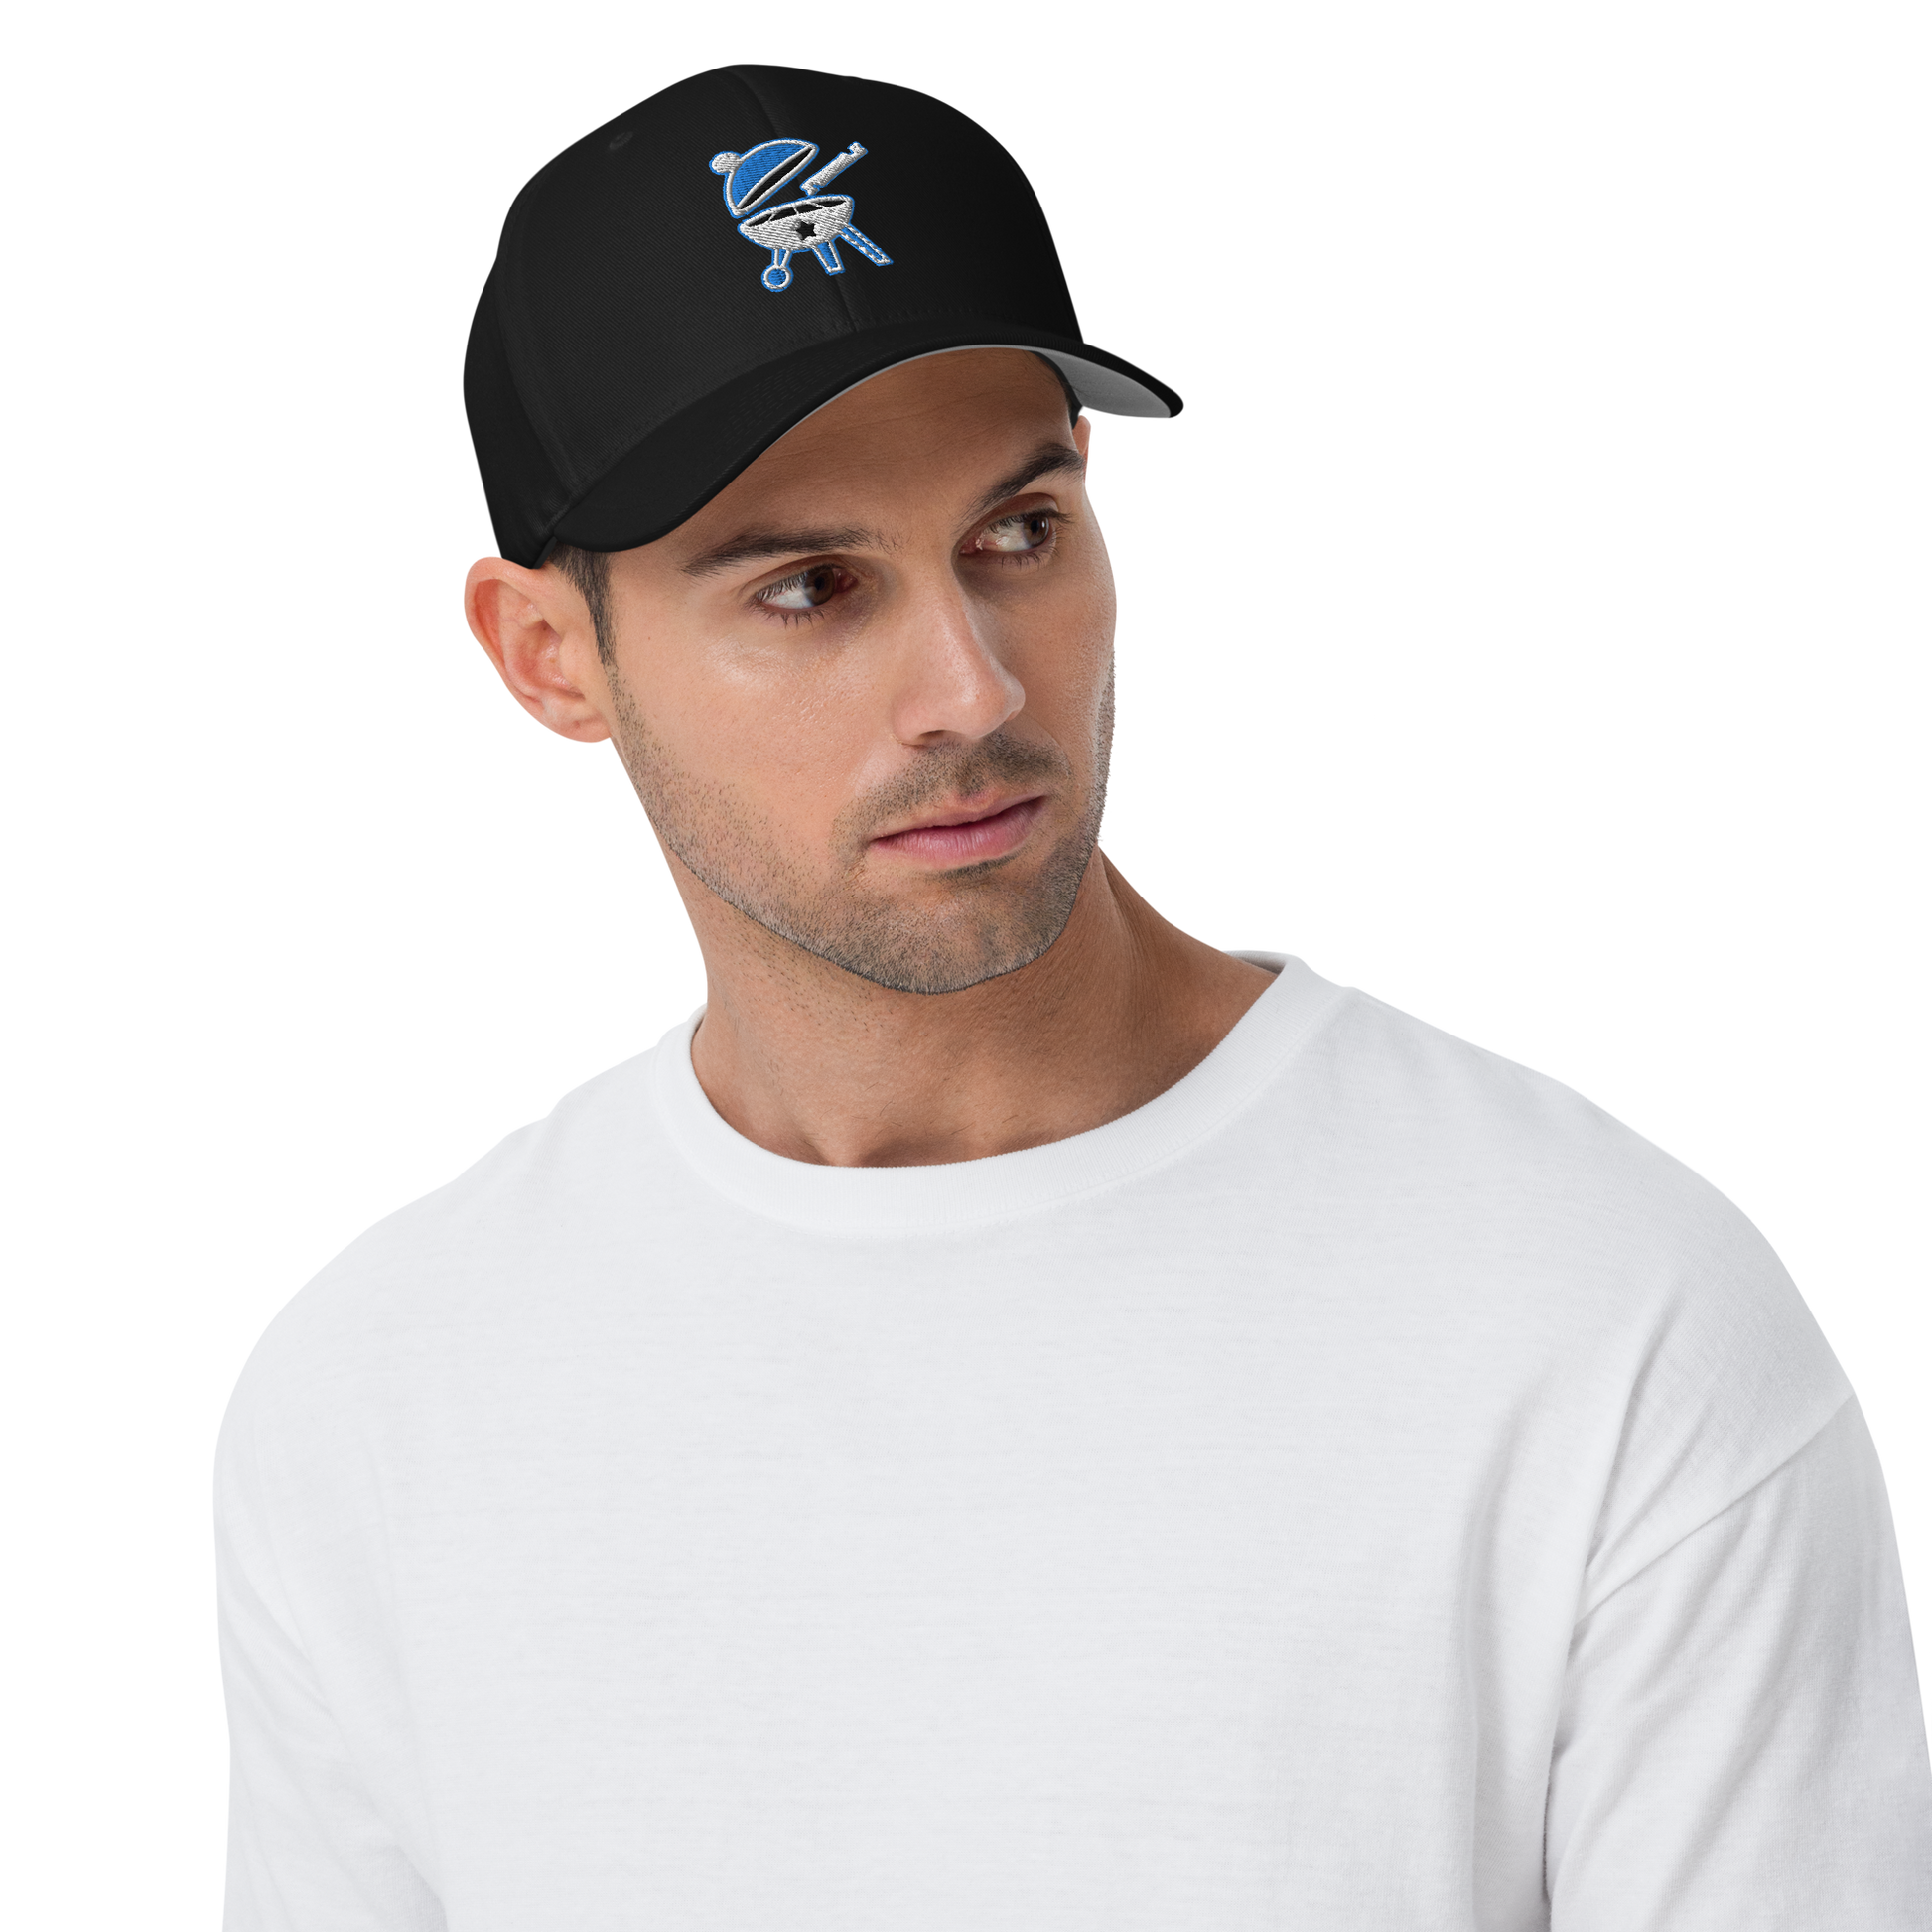 Man wearing black BBQ Pic hat. Black baseball cap with the BBQ Pic logo on it which is a round, open BBQ with a BBQ Pic about to clean it.